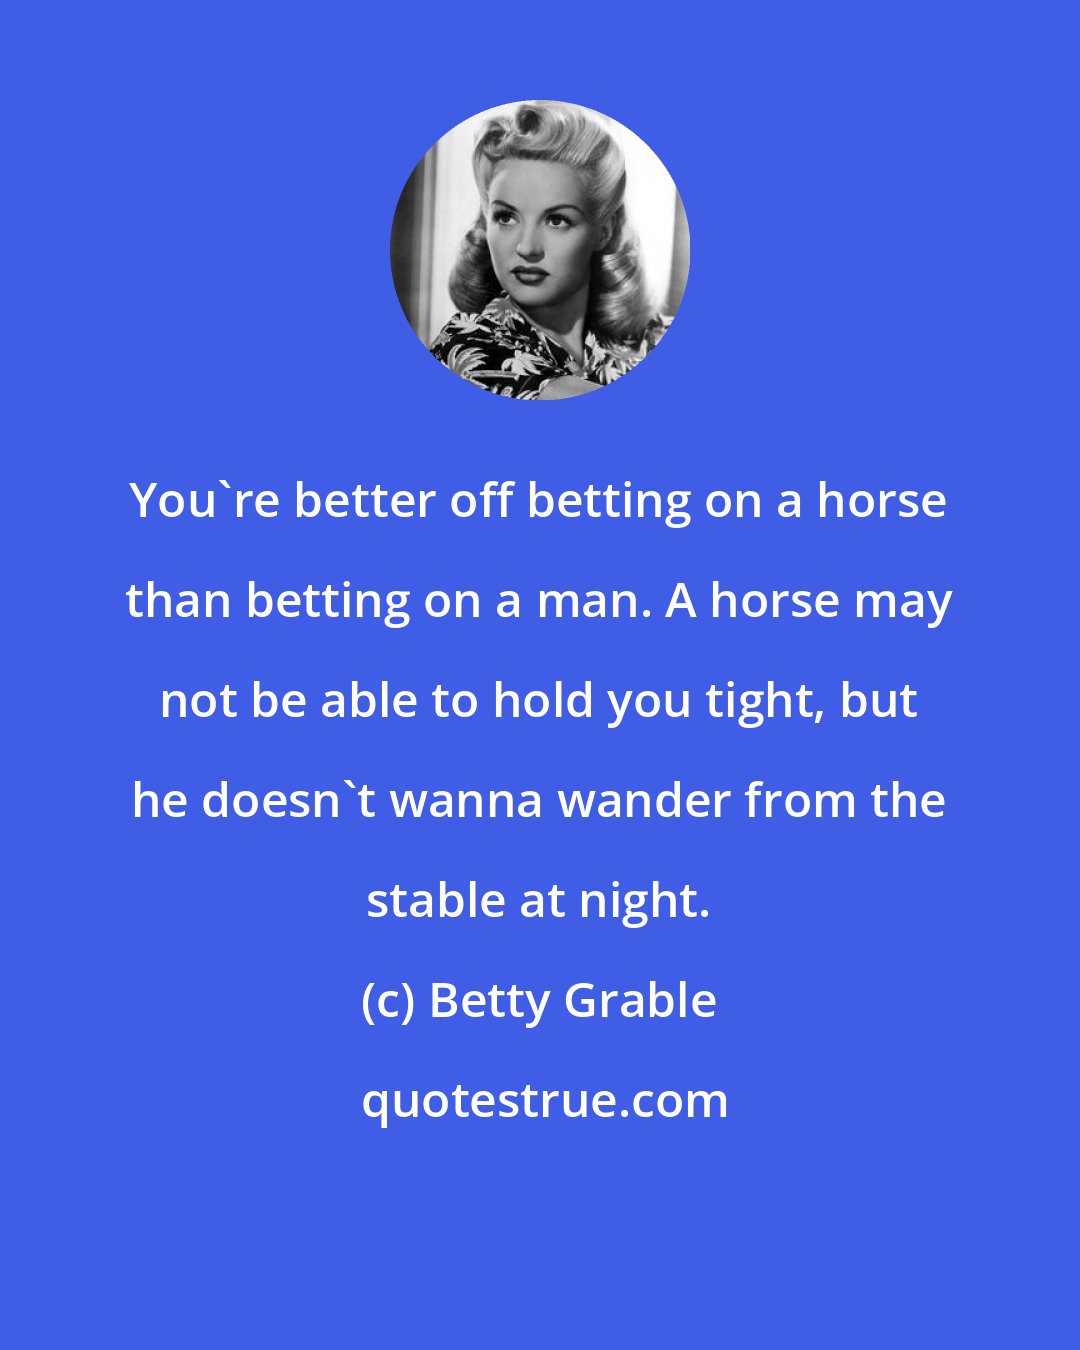 Betty Grable: You're better off betting on a horse than betting on a man. A horse may not be able to hold you tight, but he doesn't wanna wander from the stable at night.